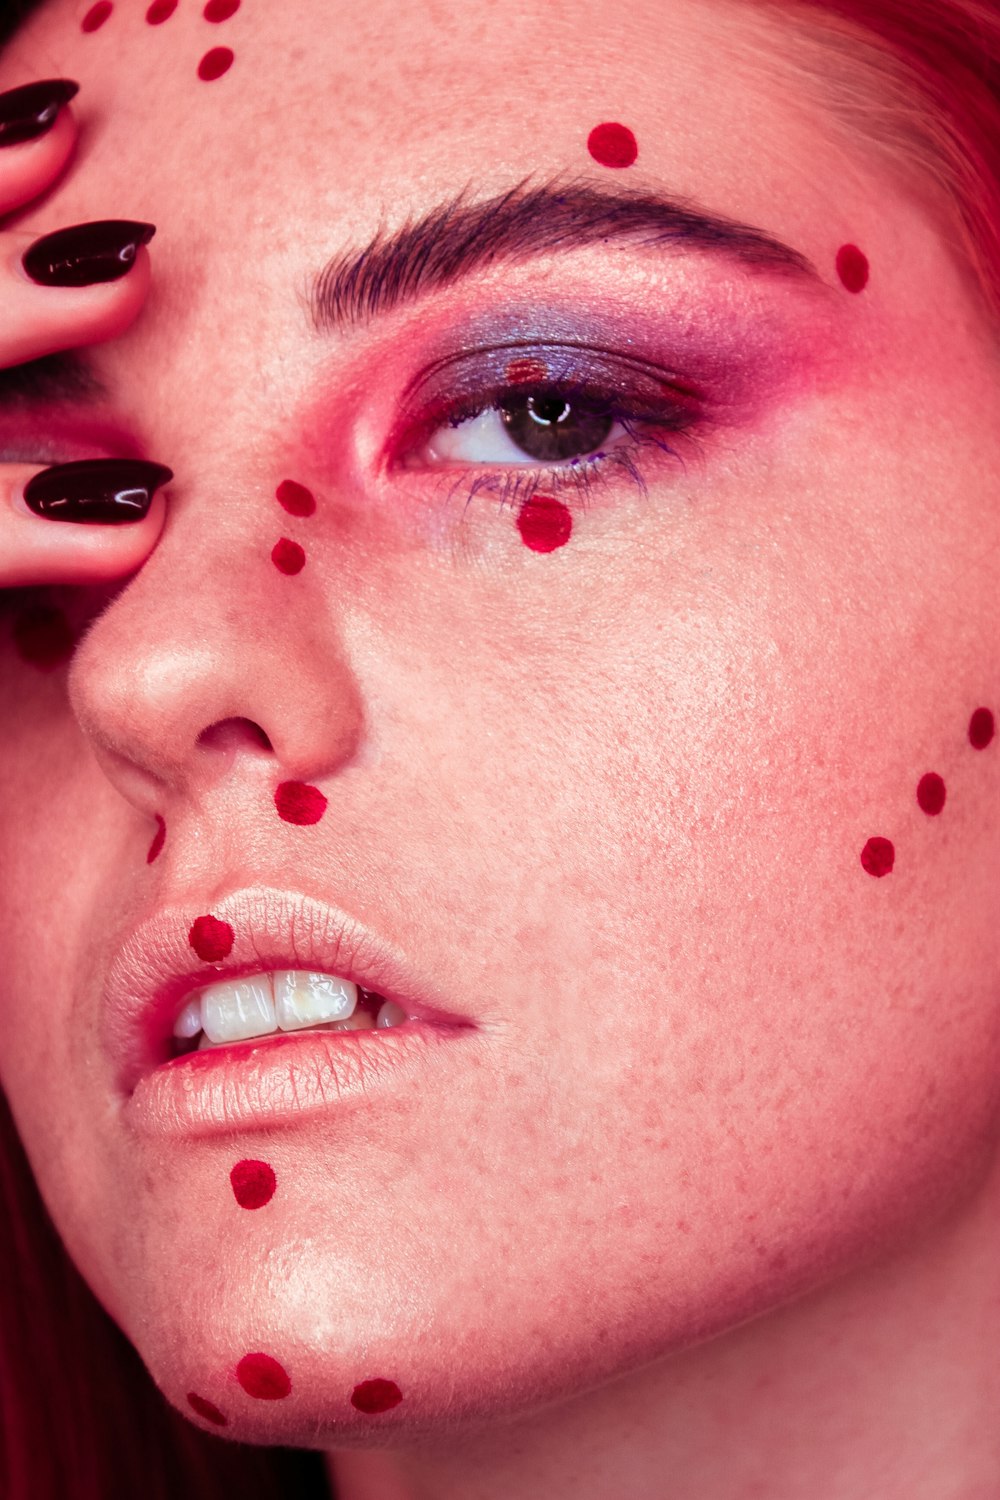 woman's face with red dots